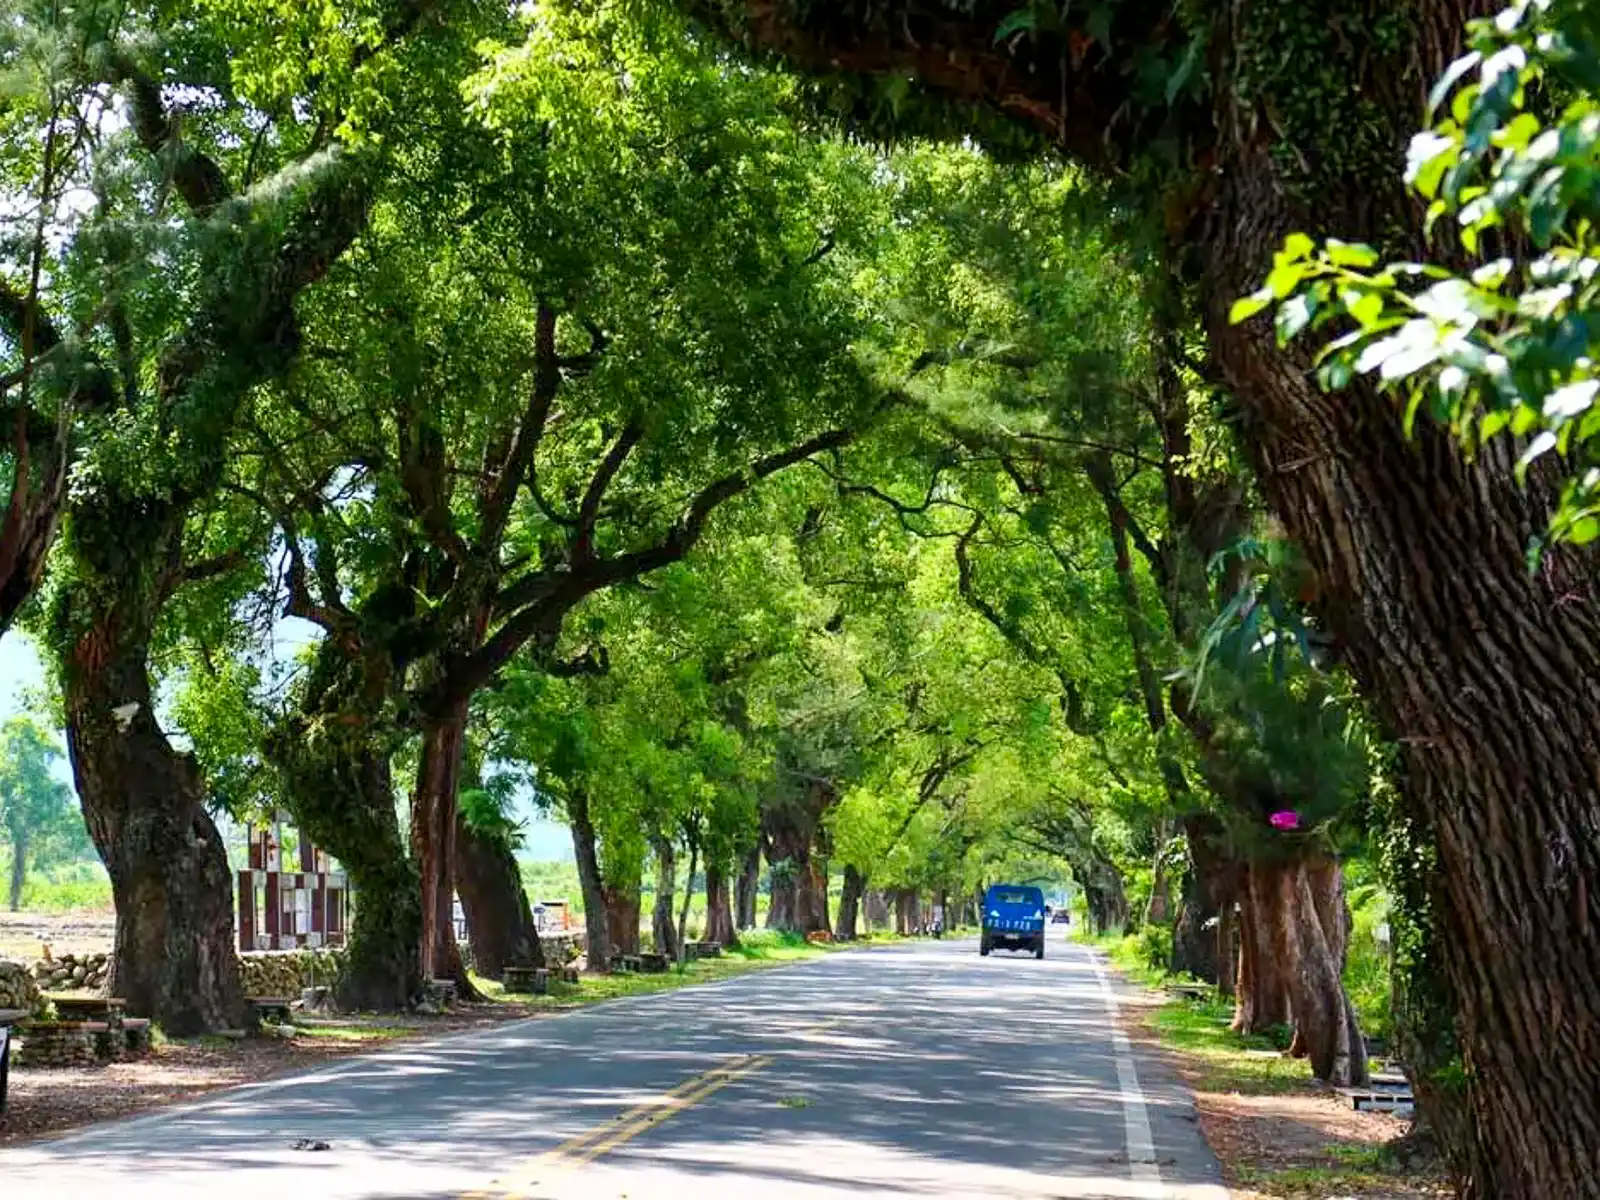 A solitary truck drives down a road lined with large camphor trees.